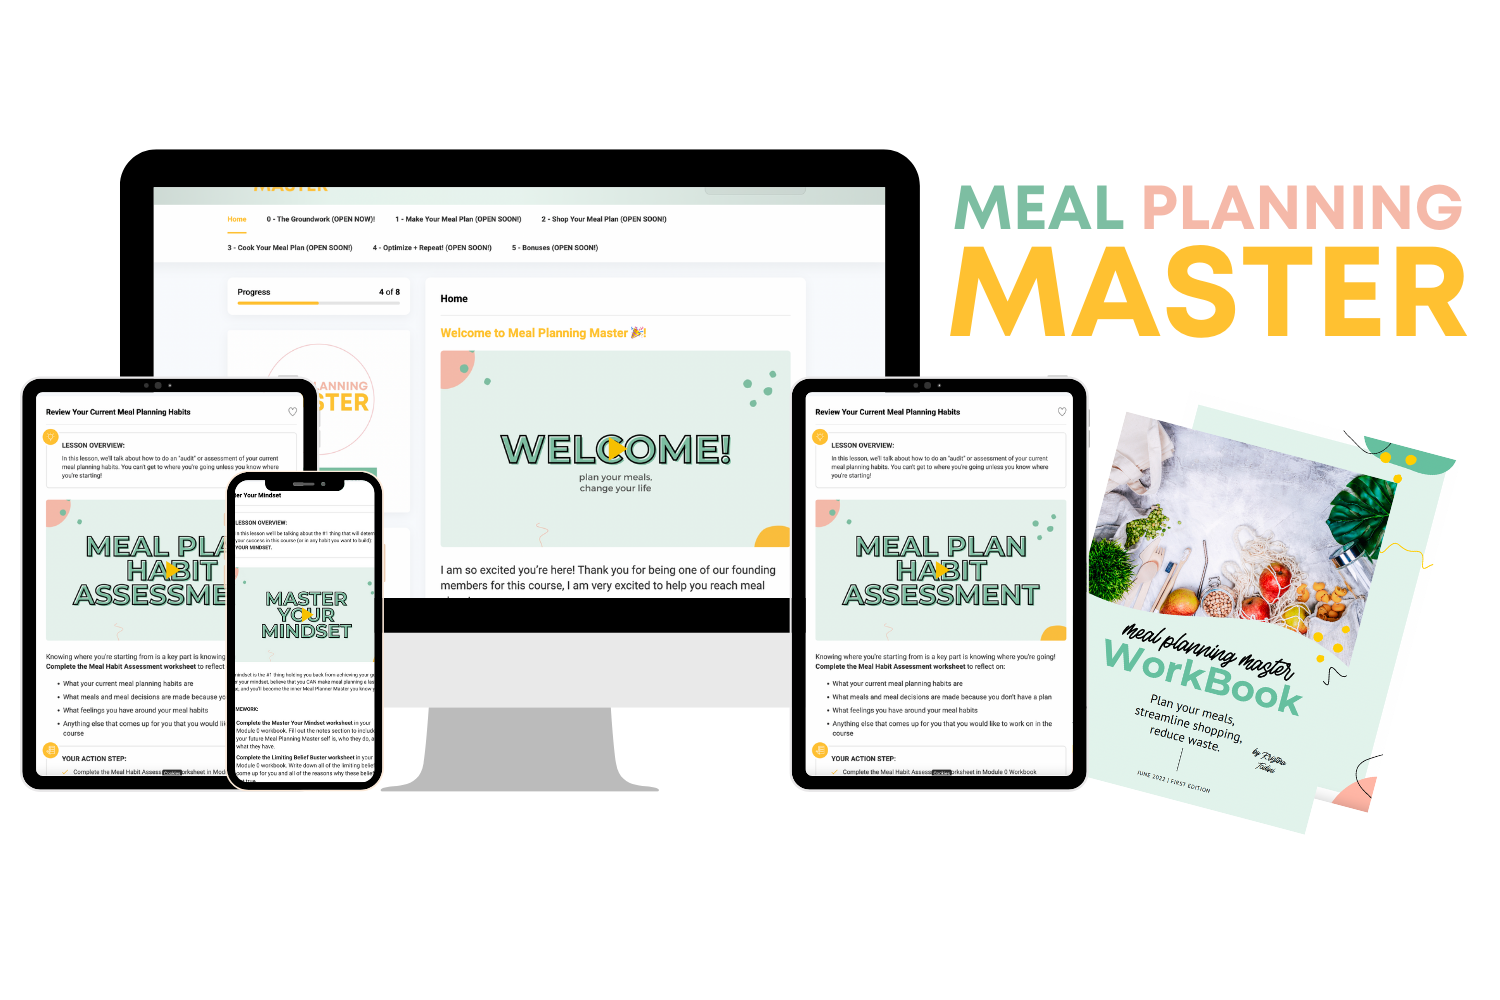 a mockup of Meal Planning Master course content